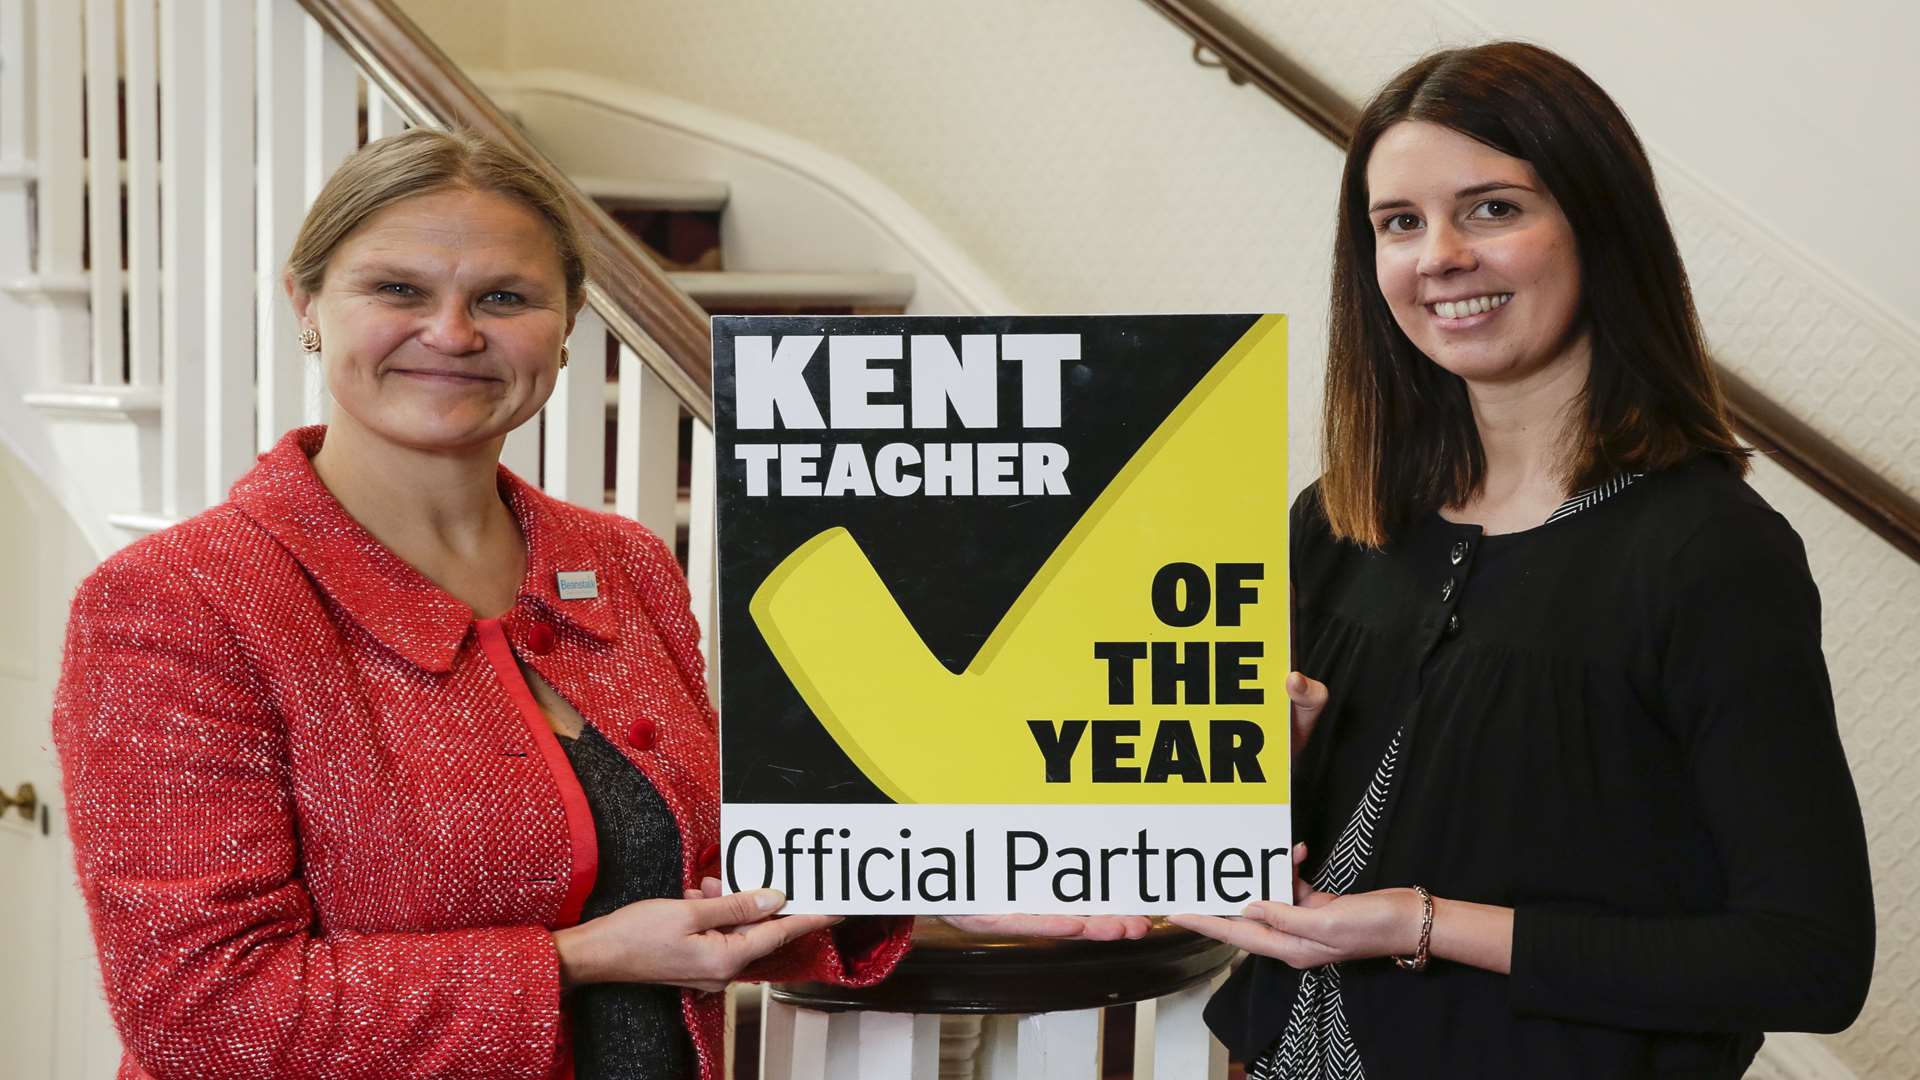 Kate Rumsby and Malou Bengtsson-Wheeler of Beanstalk call for nominations for Teacher of the Year Awards 2017